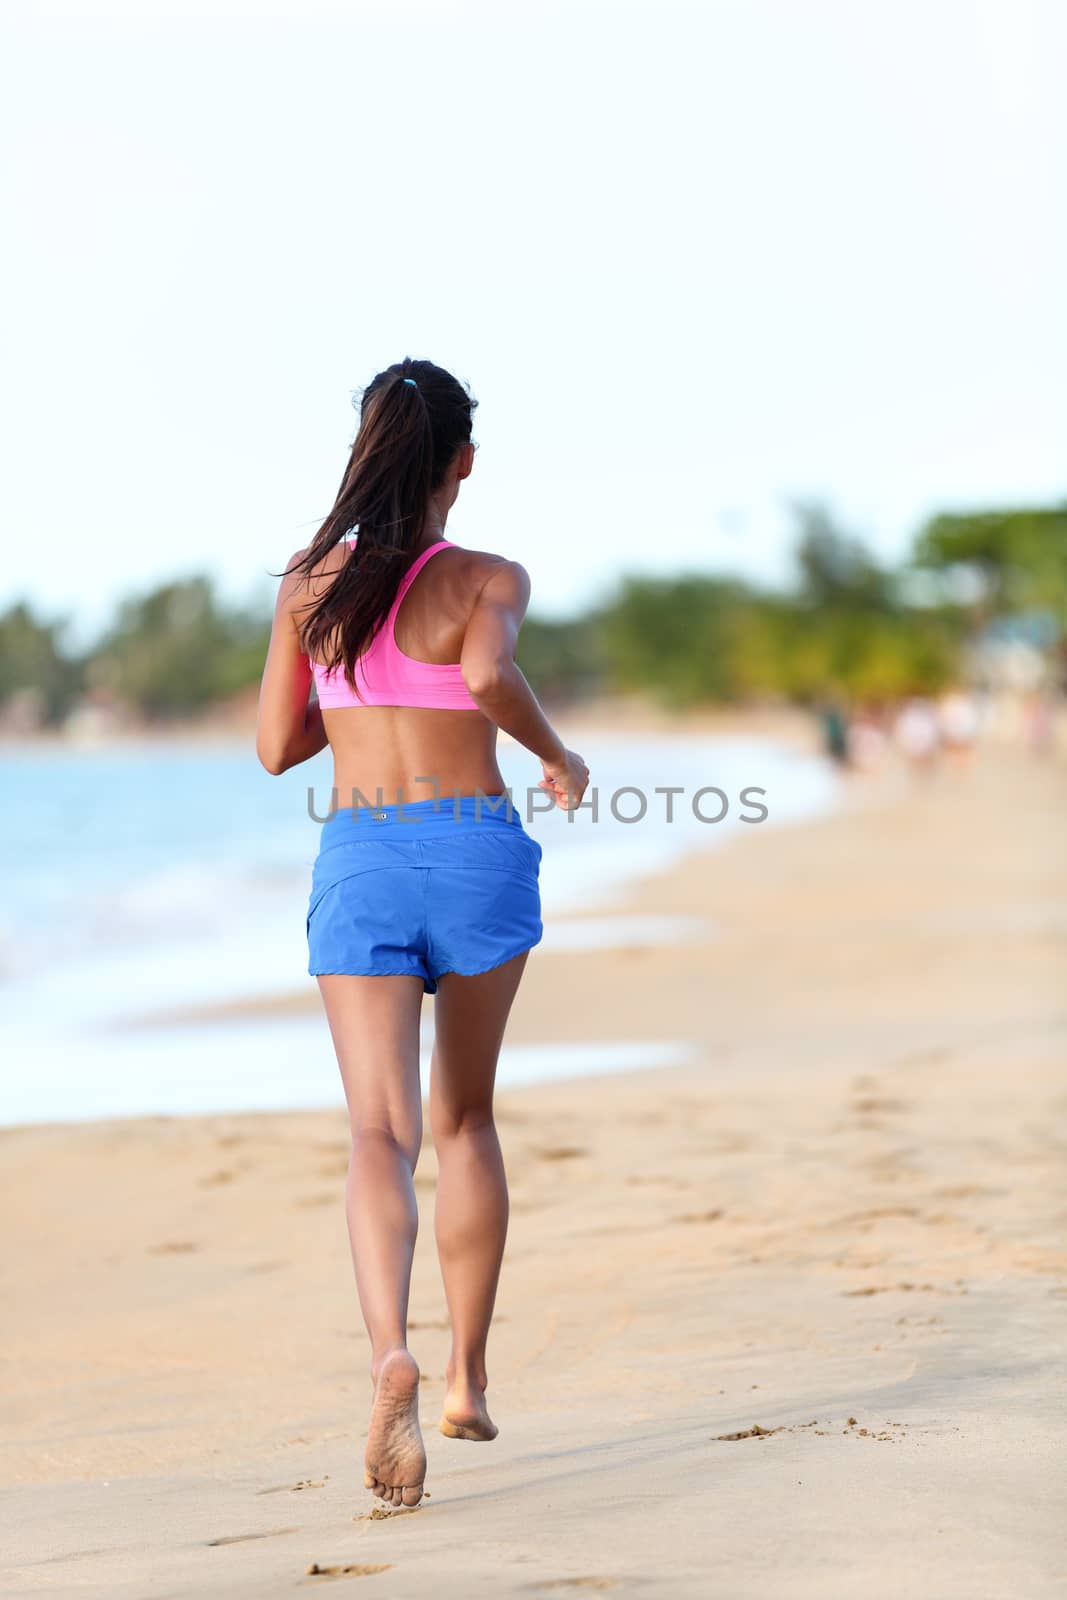 Young fit woman jogging on beach. Full length rear view of determined female is in sports clothing. Runner is exercising at sea shore during sunny day.